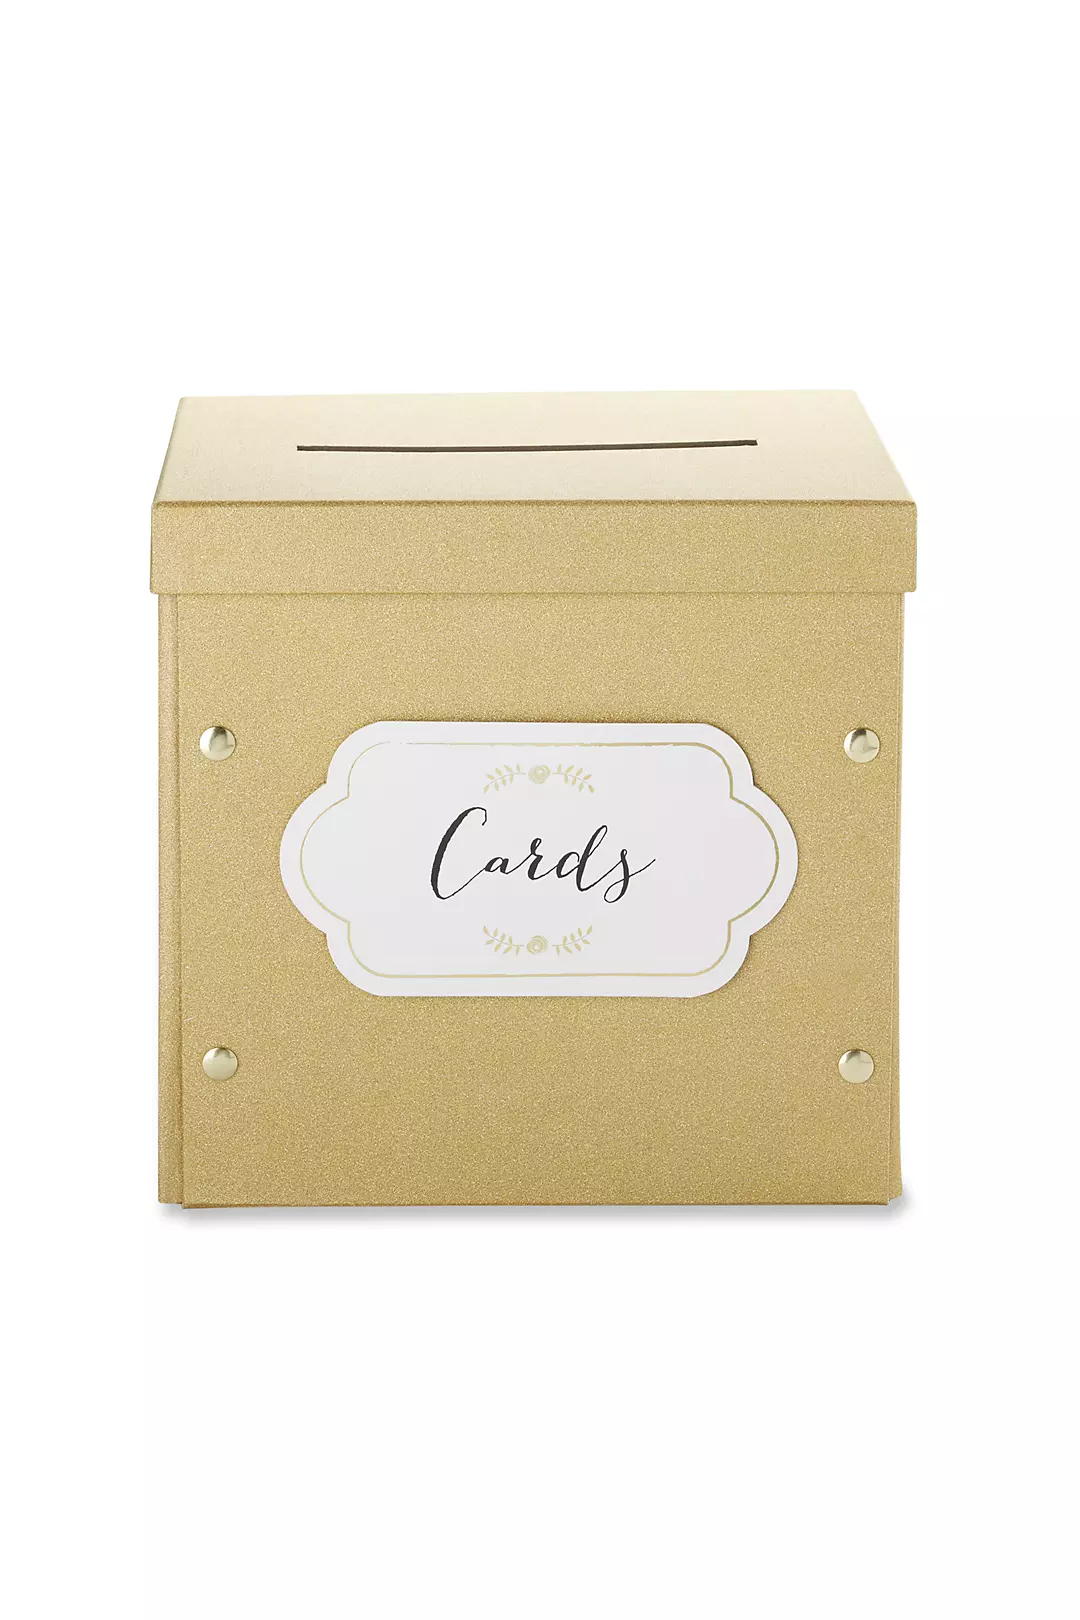 Gold Shimmer Collapsible Card Box Image